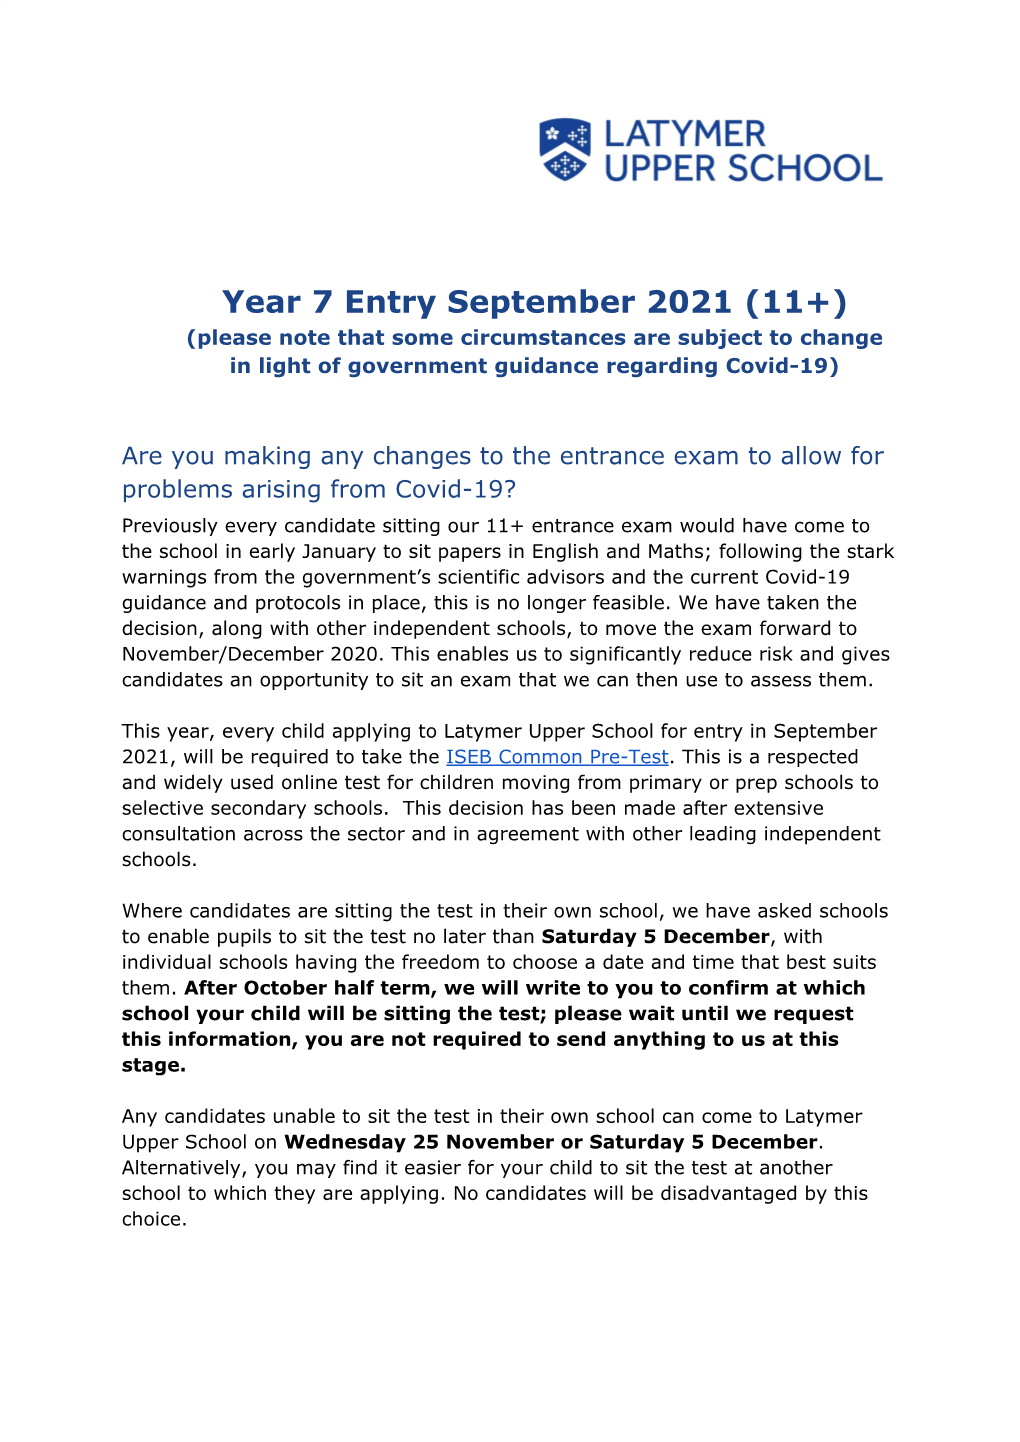 Year 7 Entry September 2021 (11+) (Please Note That Some Circumstances Are Subject to Change in Light of Government Guidance Regarding Covid-19)